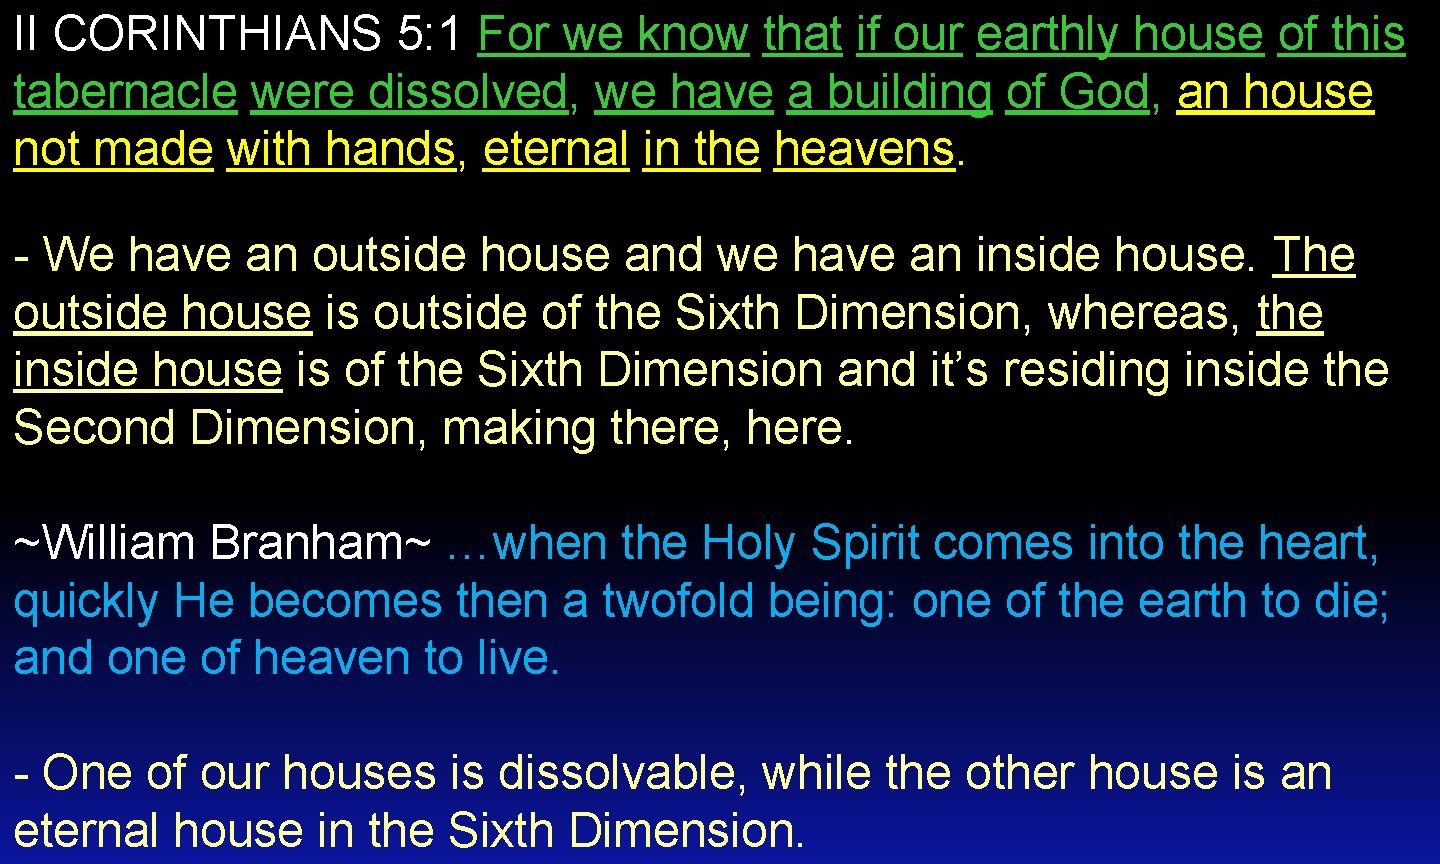 II CORINTHIANS 5: 1 For we know that if our earthly house of this